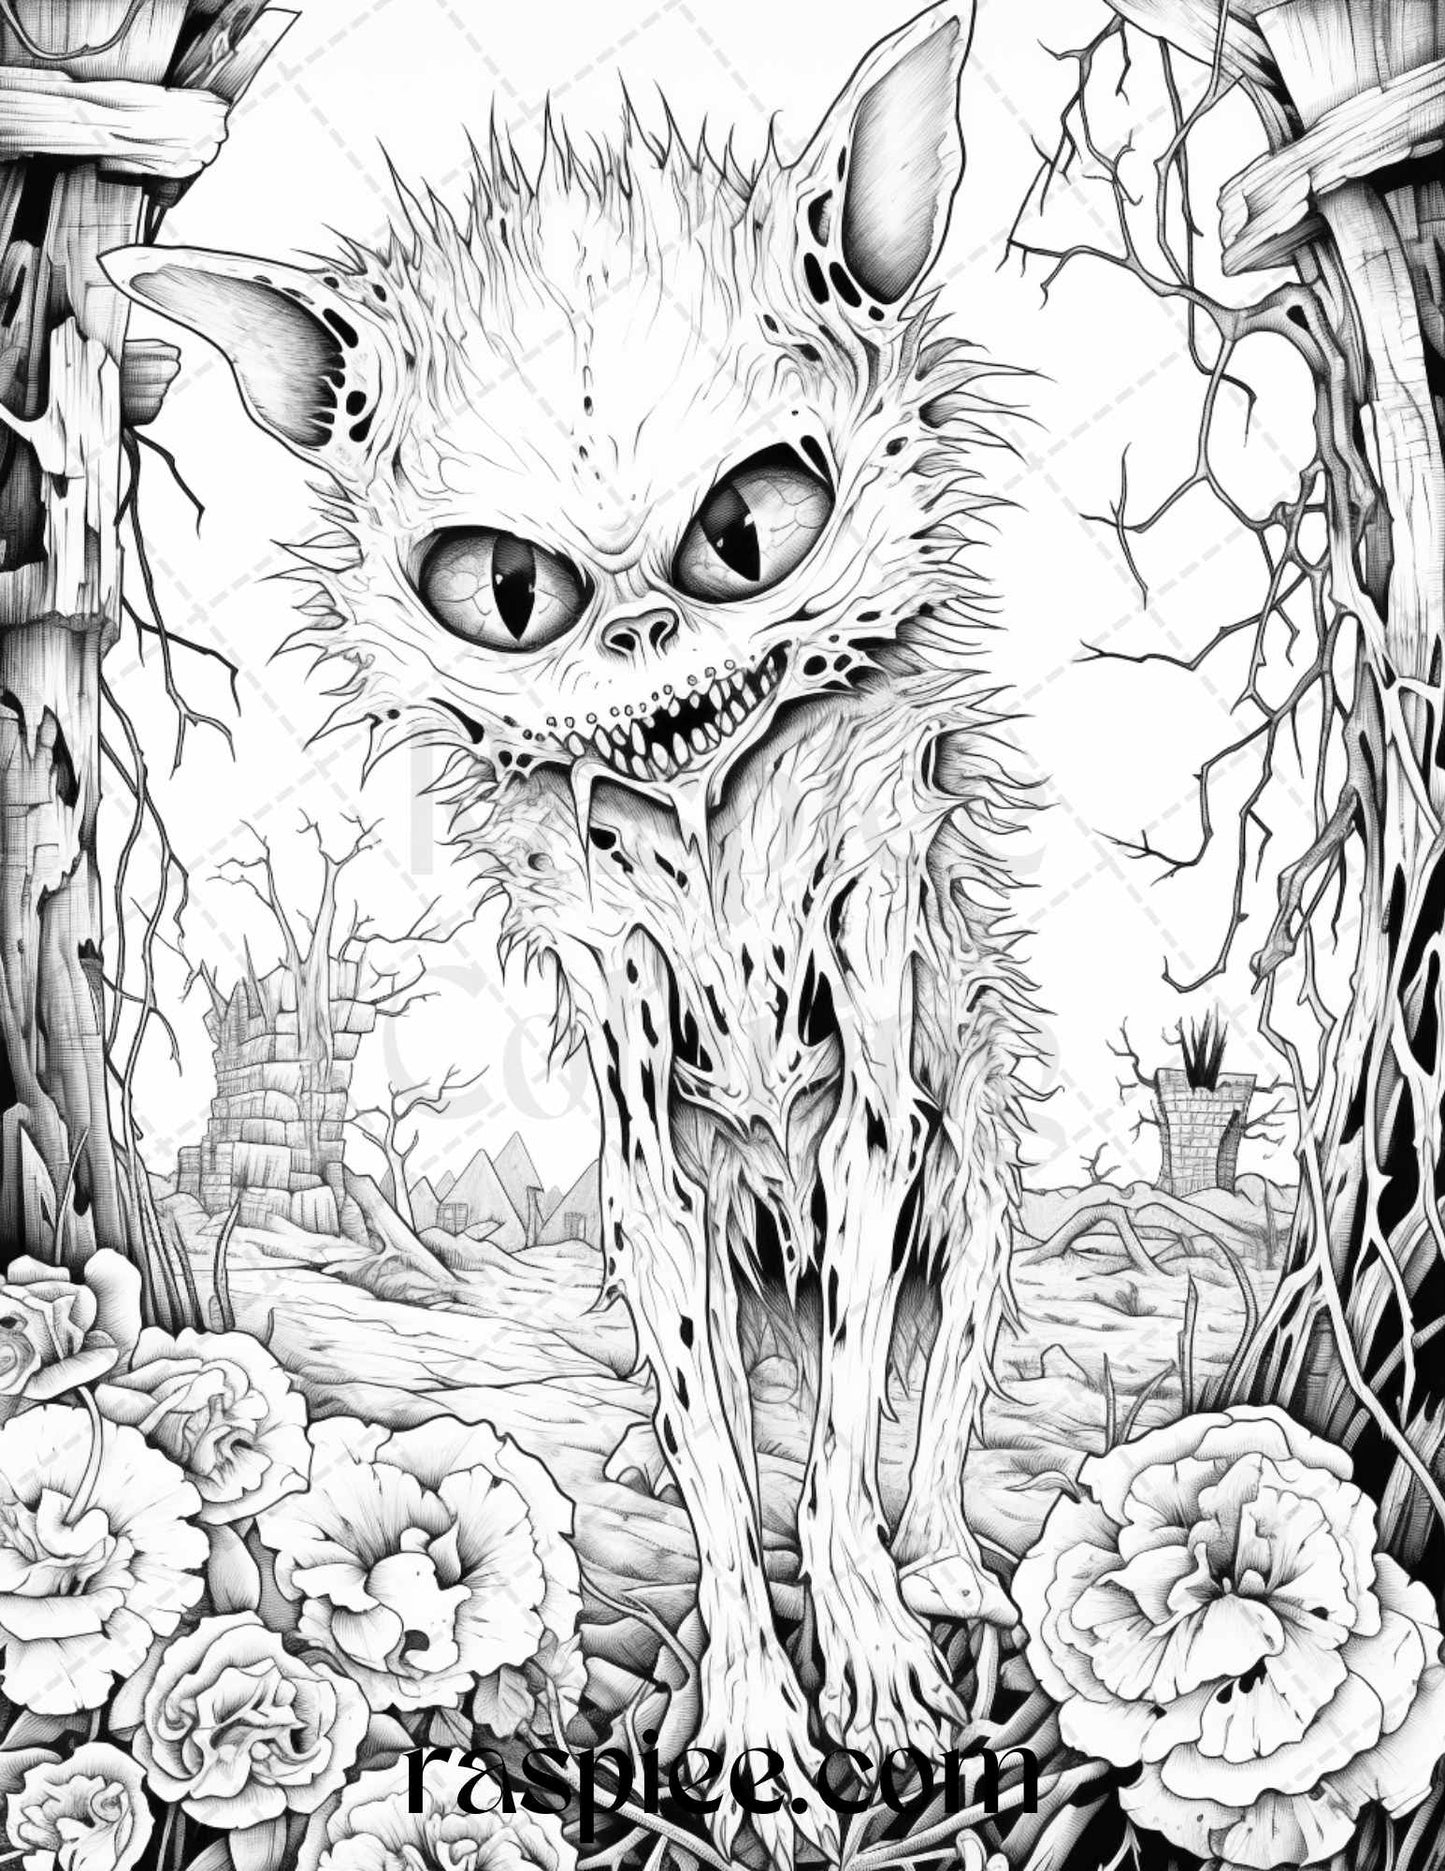 66 Horror Zombie Animals Grayscale Coloring Pages Printable for Adults, PDF File Instant Download - Raspiee Coloring